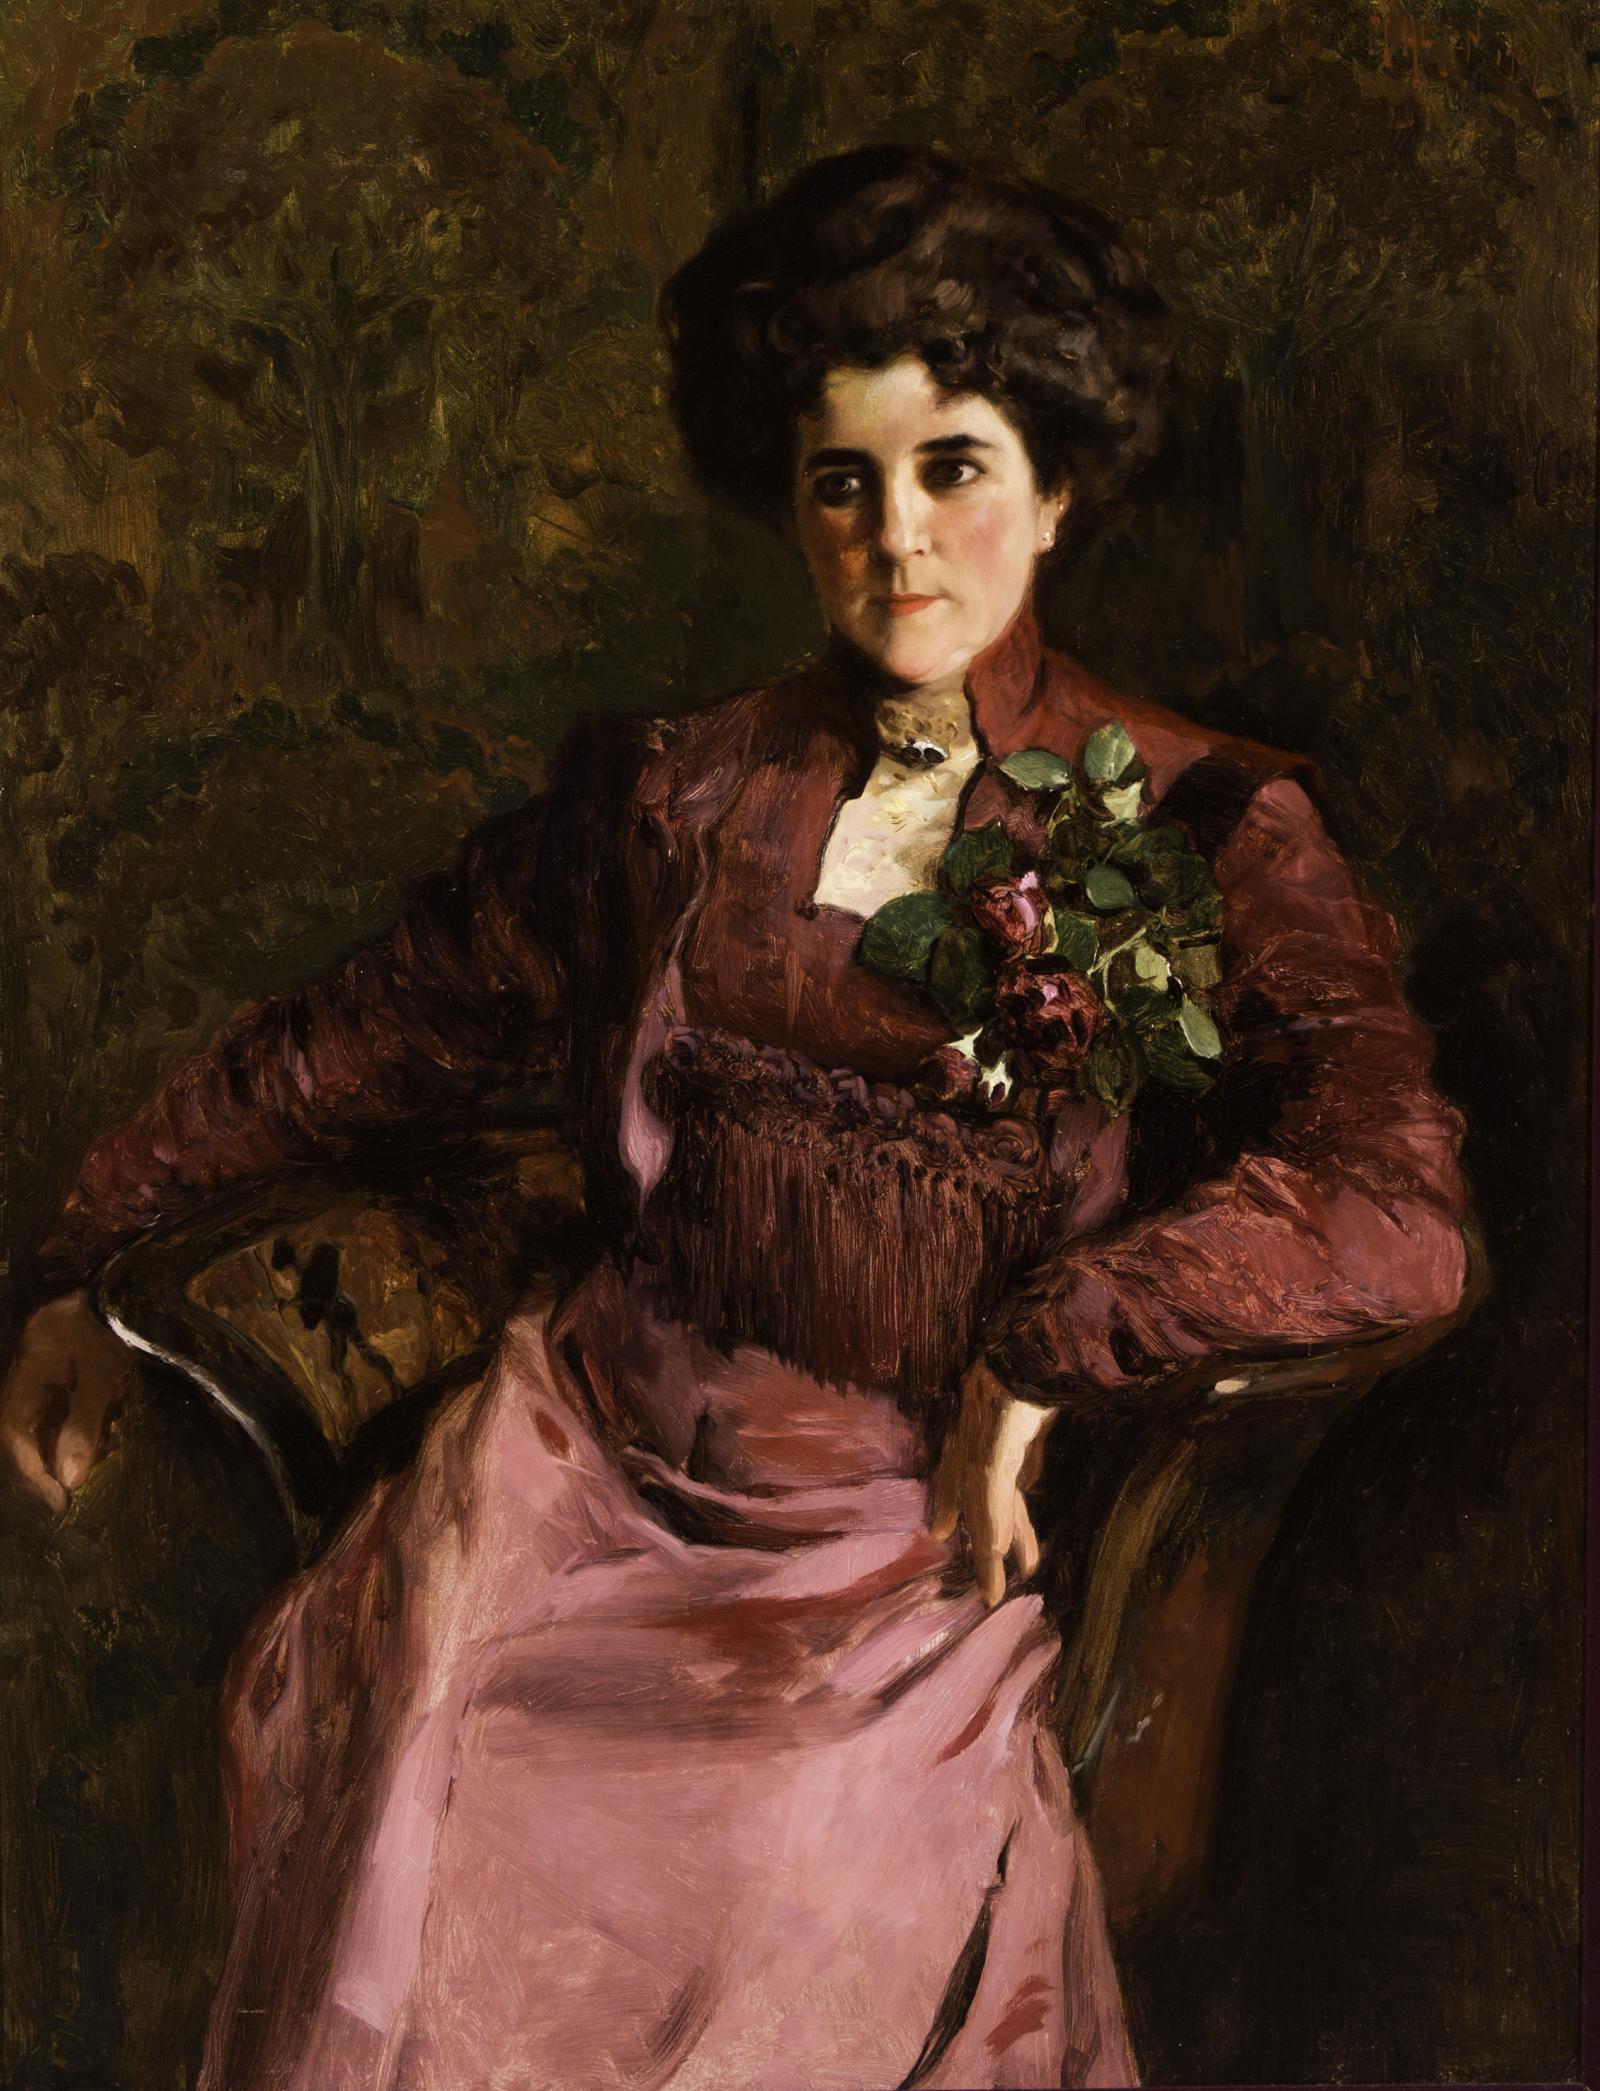 Portrait of a woman sitting in a chair.